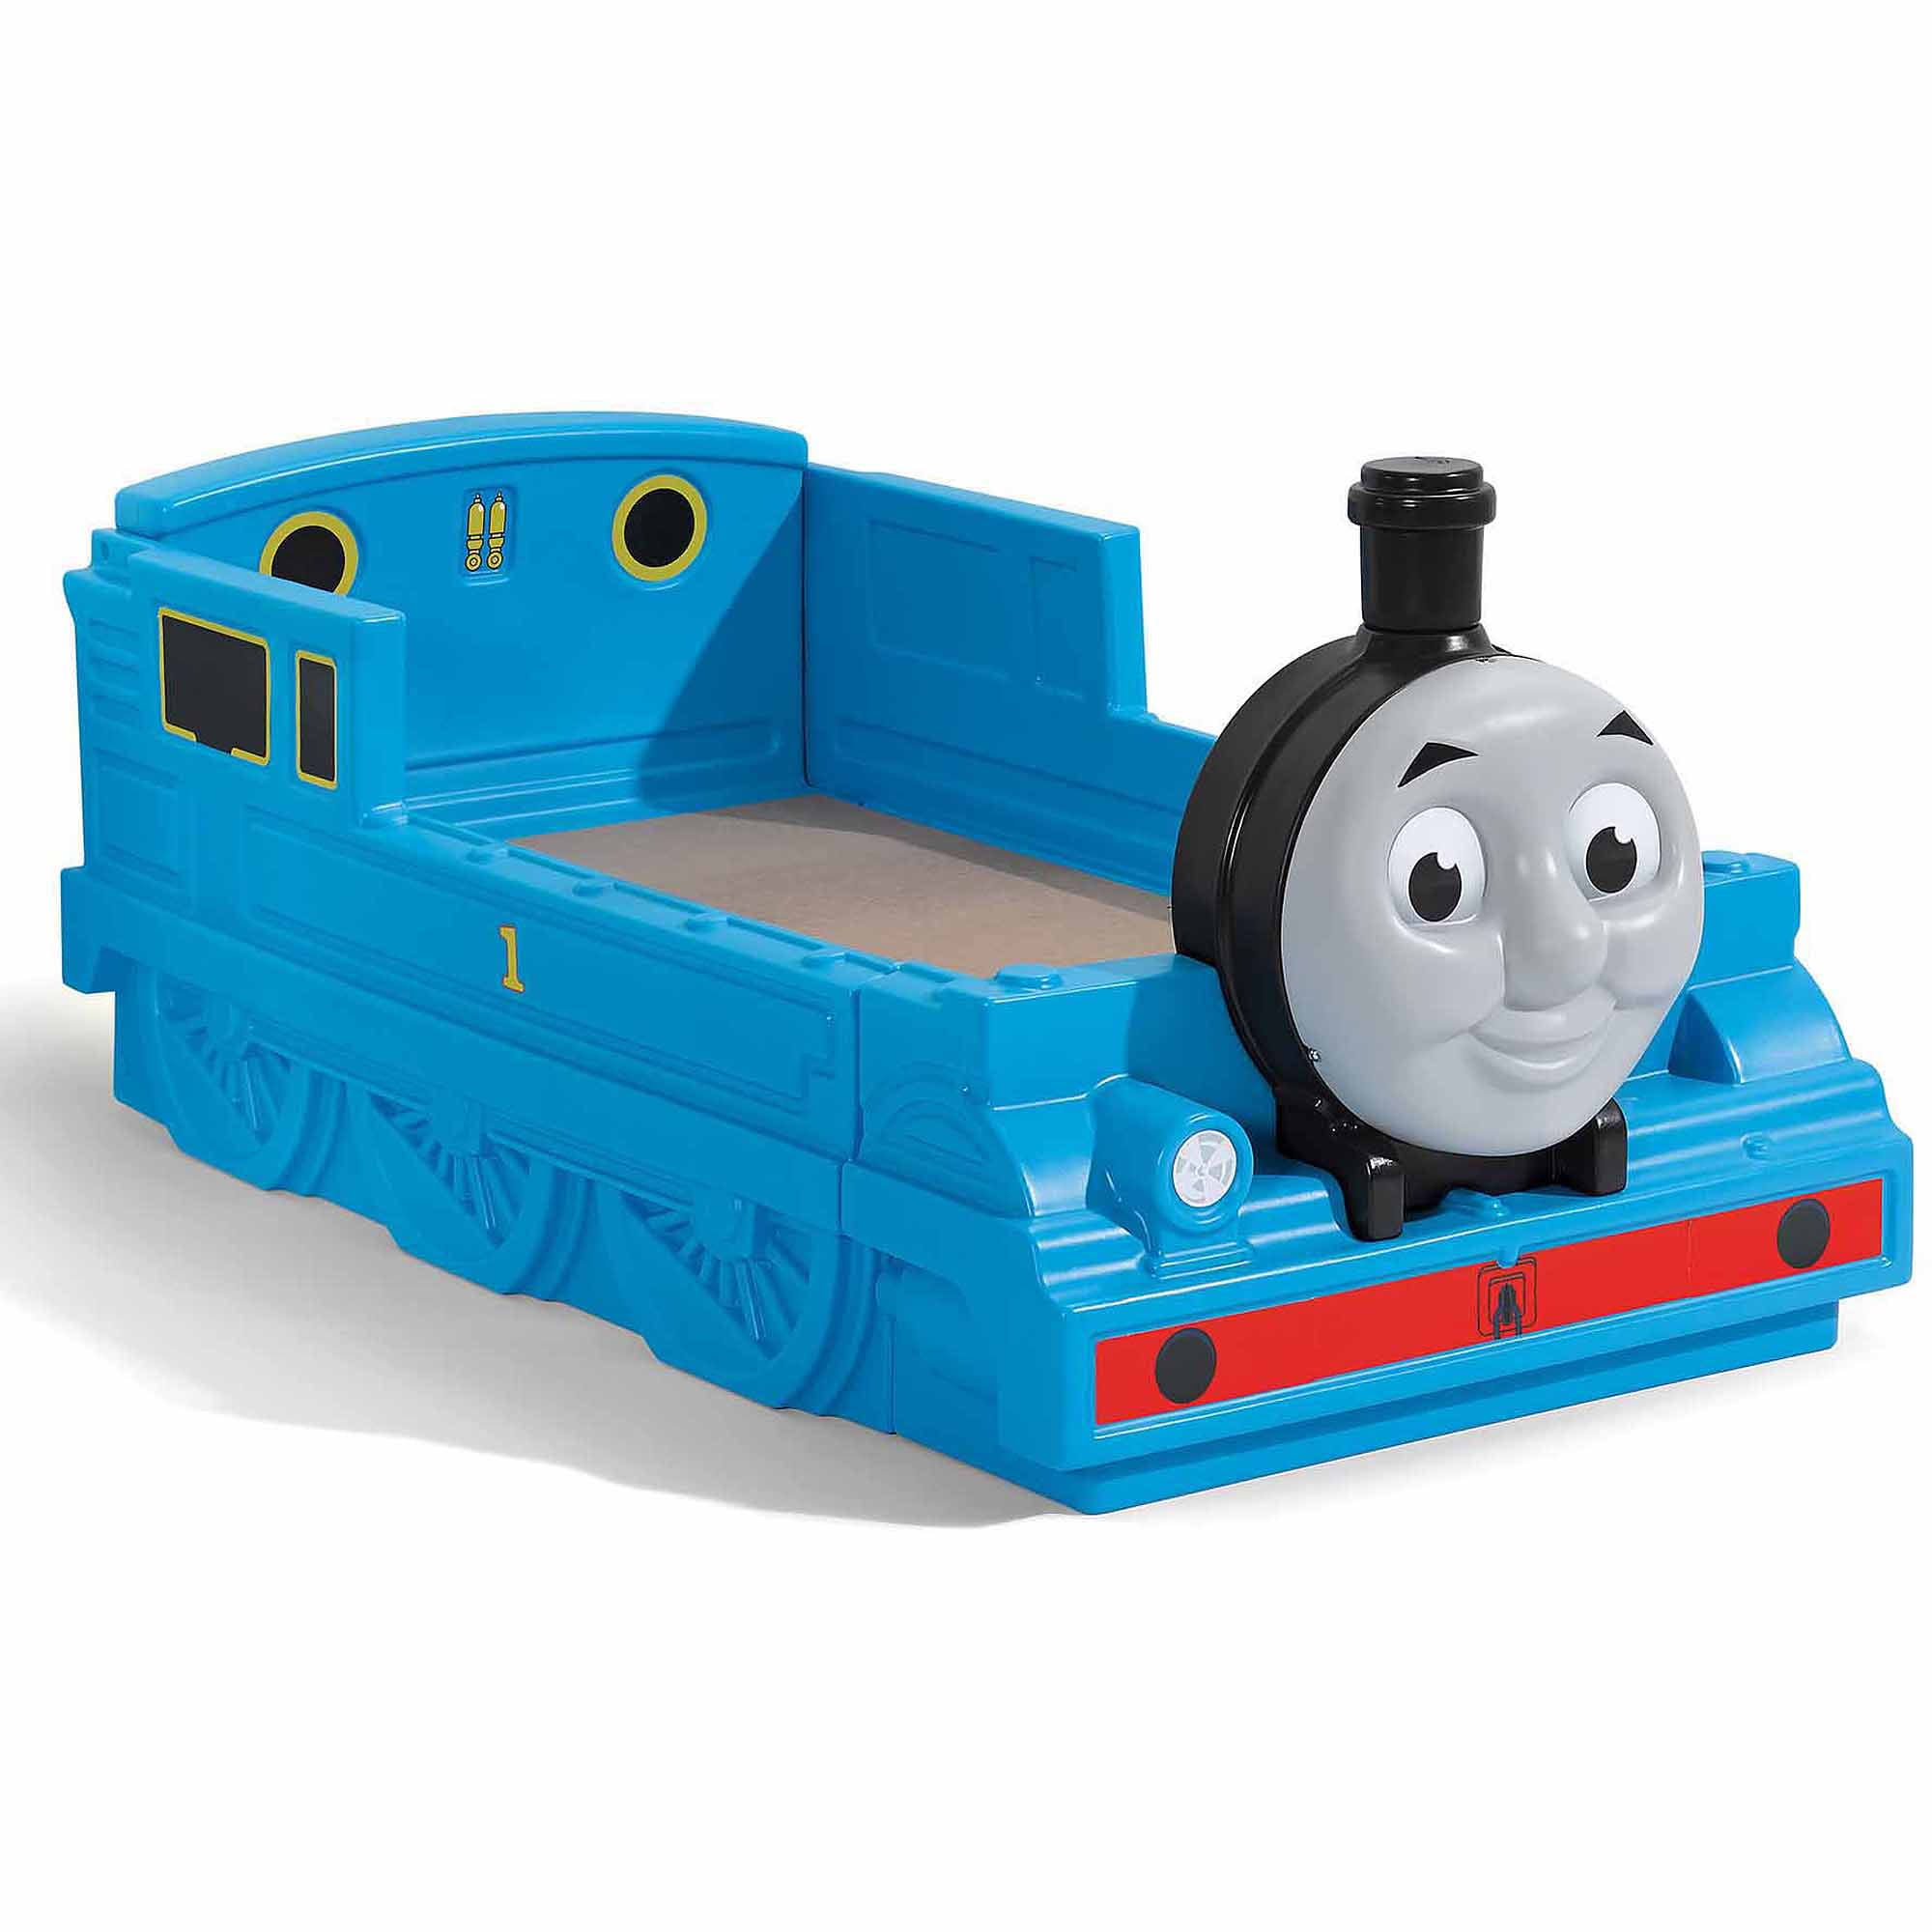 Step2 Thomas the Tank Engine Plastic Toddler Bed, Blue